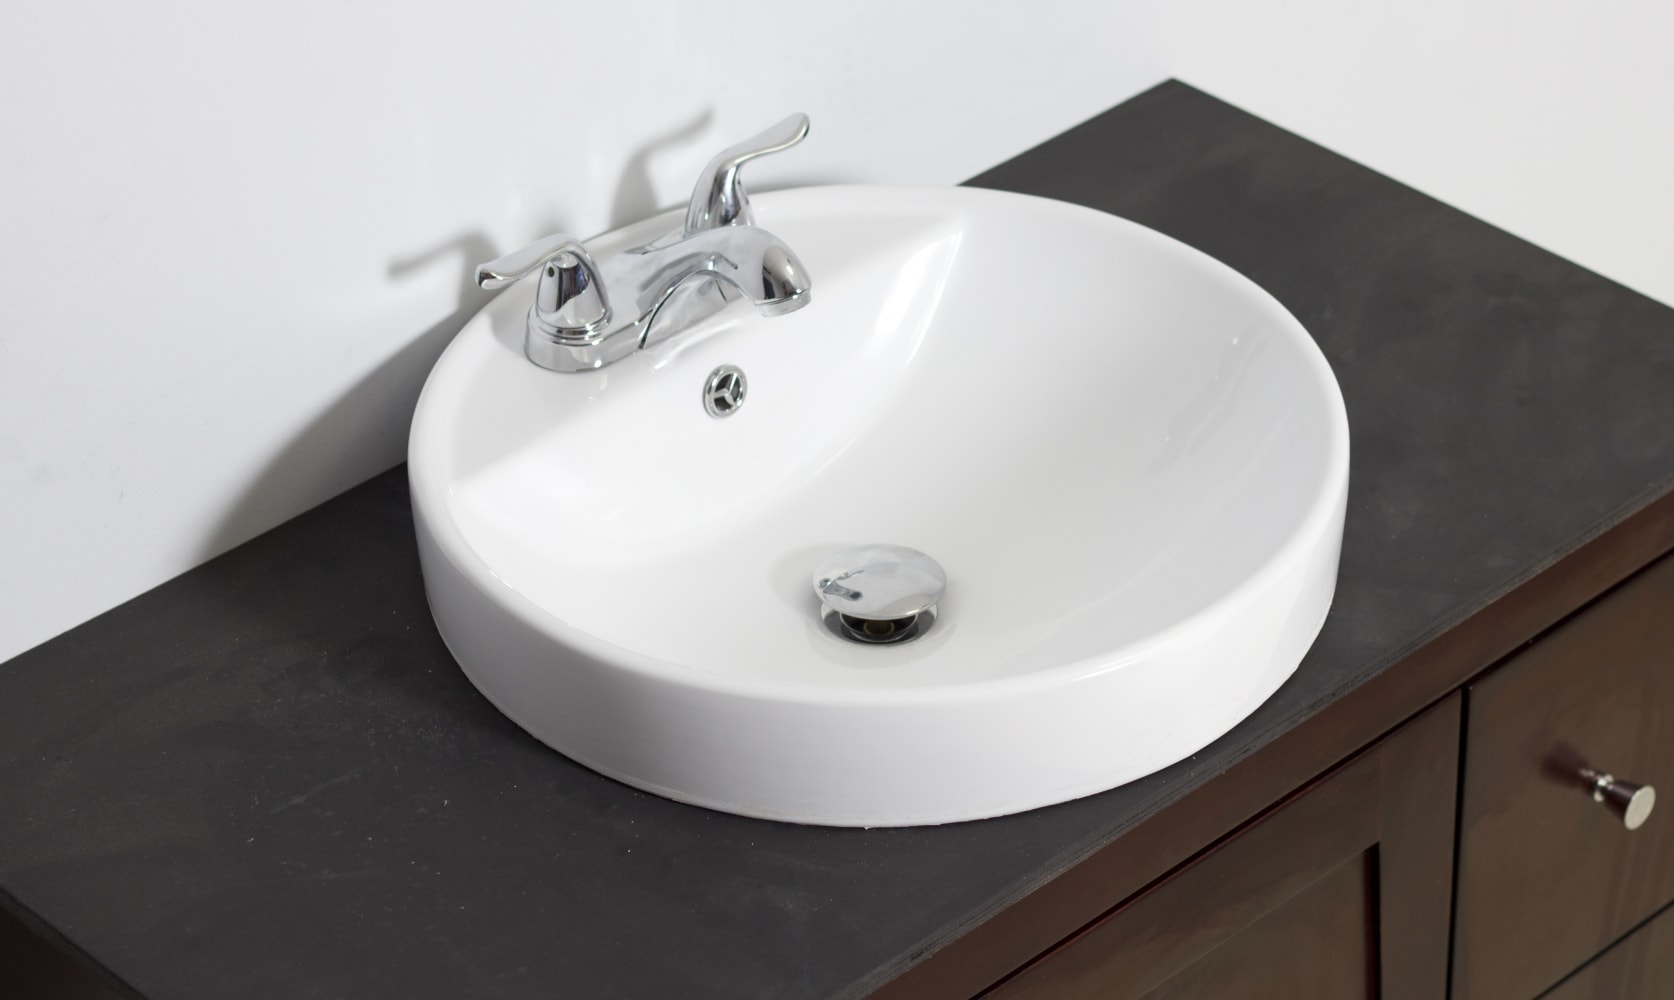 Compliment The Bathroom & Change Décor P-224 Fine Porcelain Round Vessel Sinks with Enamel Glaze Finish STYLISH® Round Bathroom Over The Counter Sinks Smooth & Stain Resistant Surface